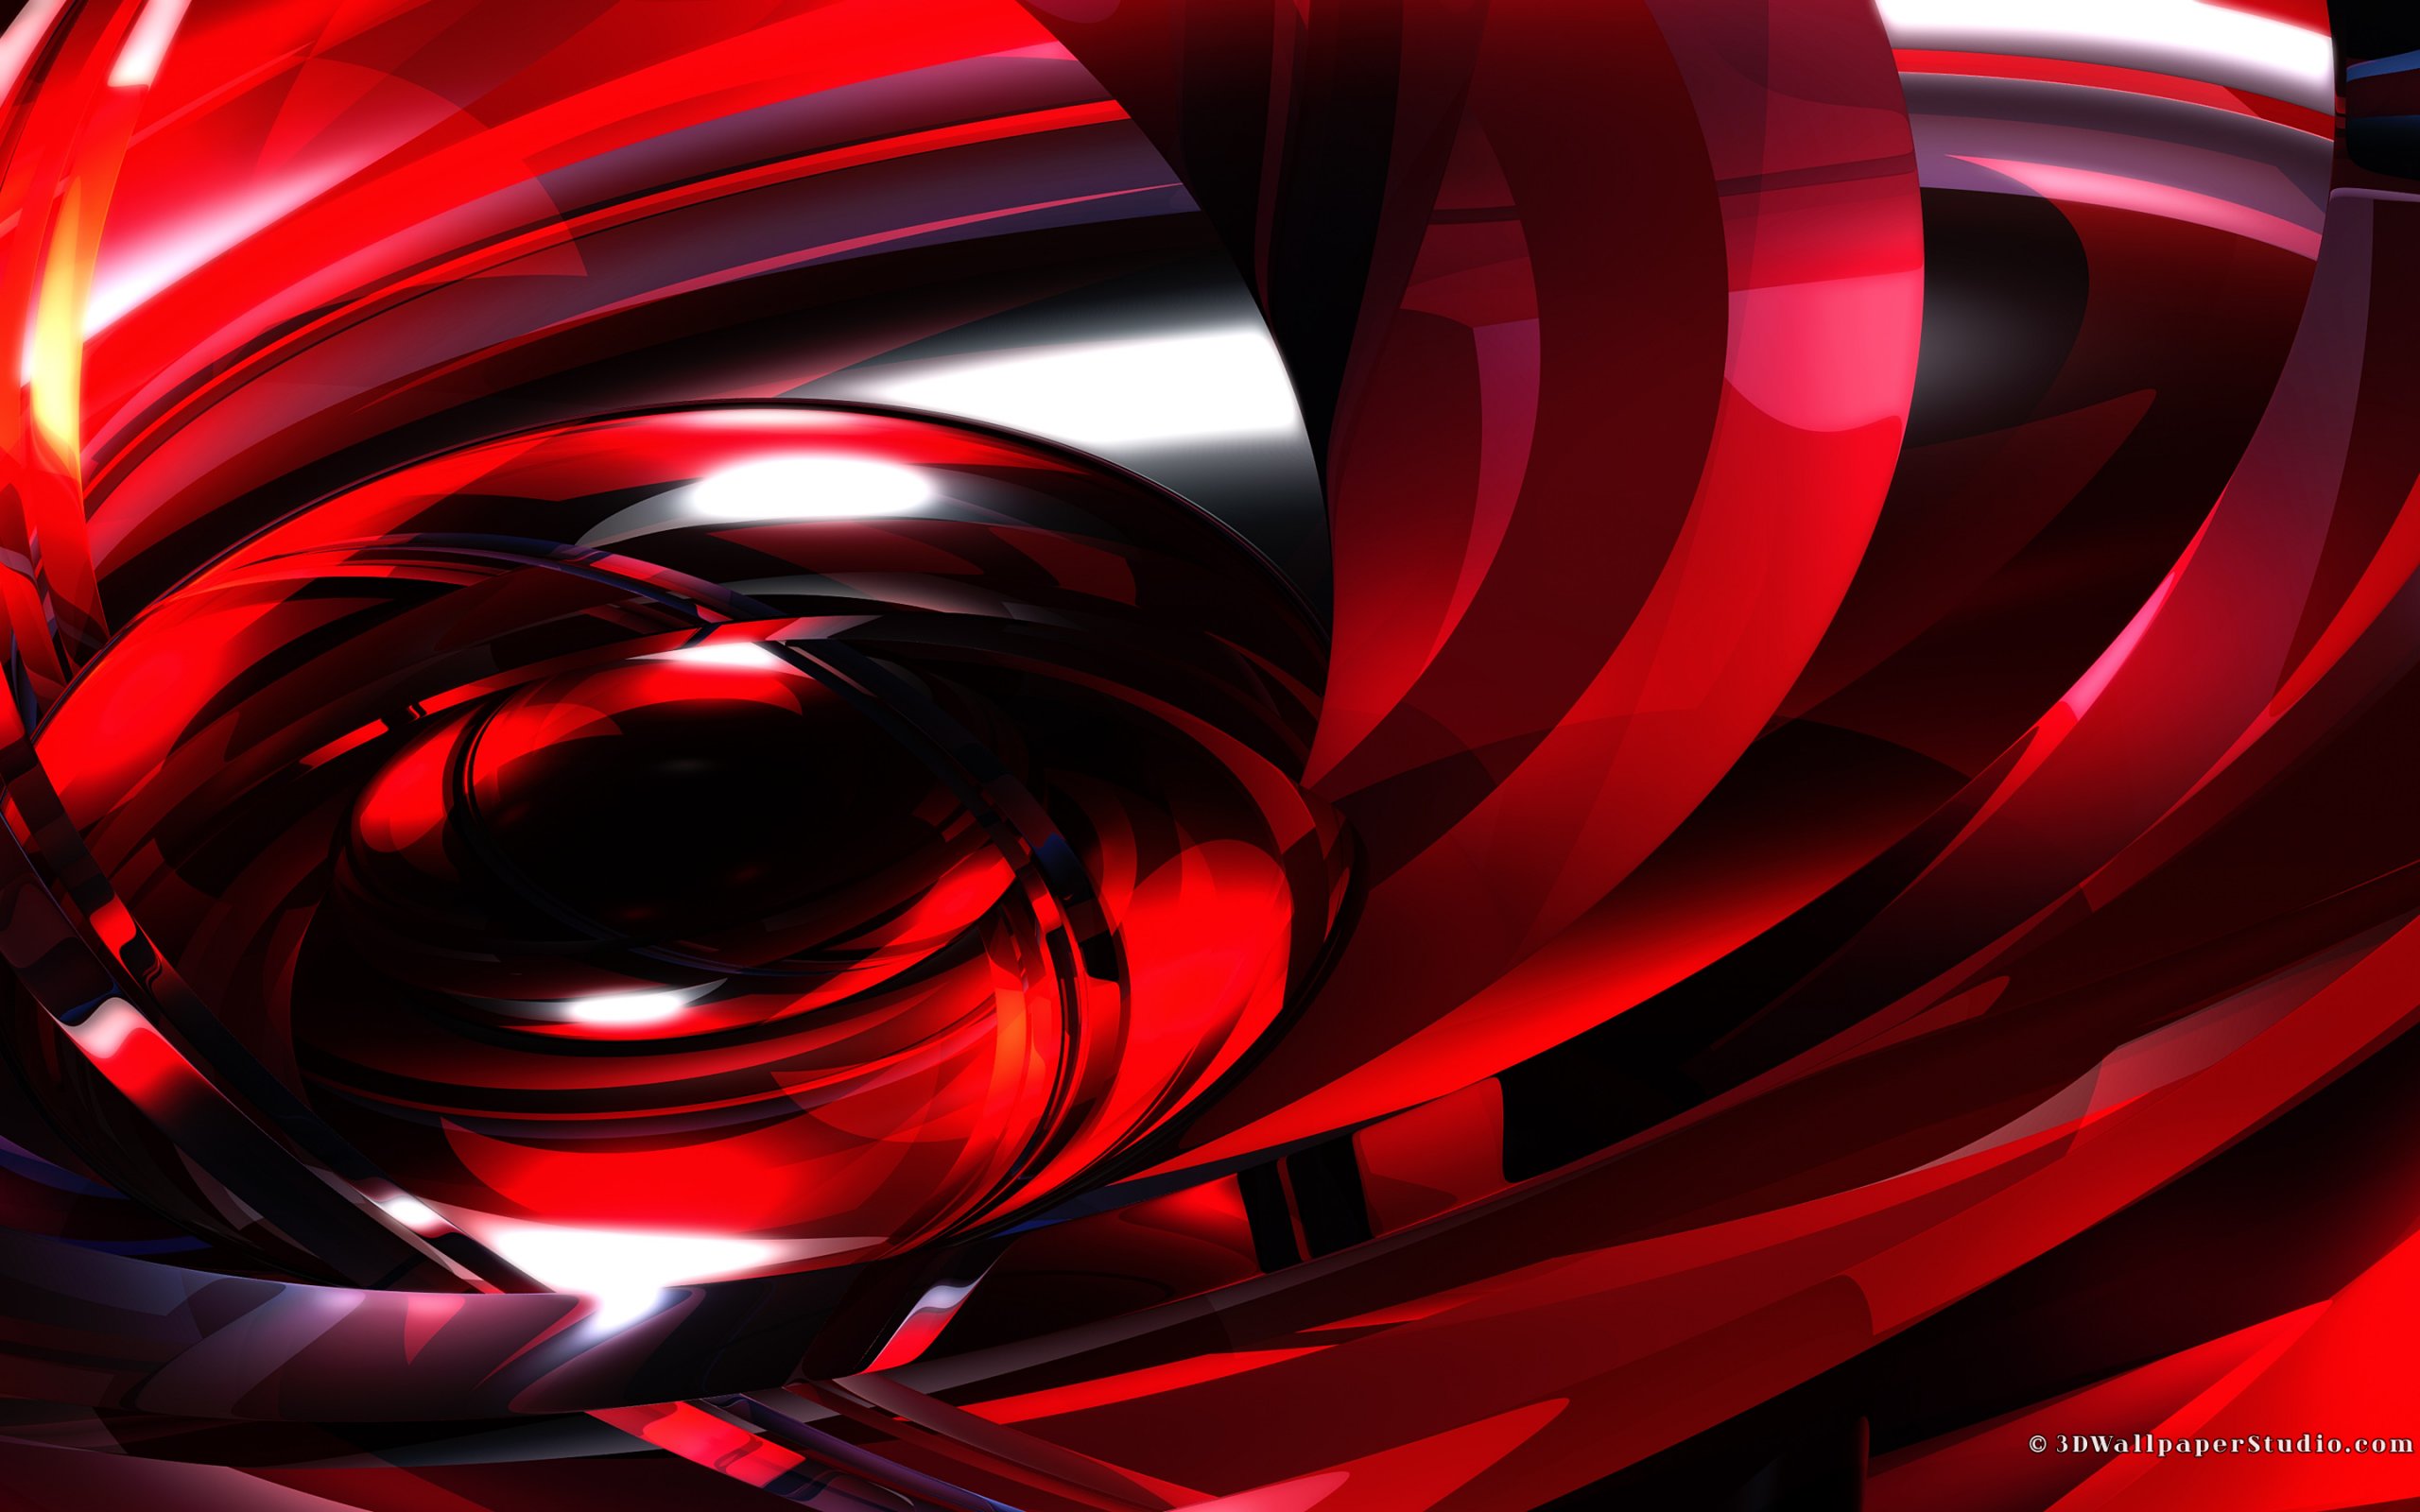 Glowing Red Abstract Wallpaper In Screen Resolution - Swirl Red Abstract Wallpaper 4k - HD Wallpaper 